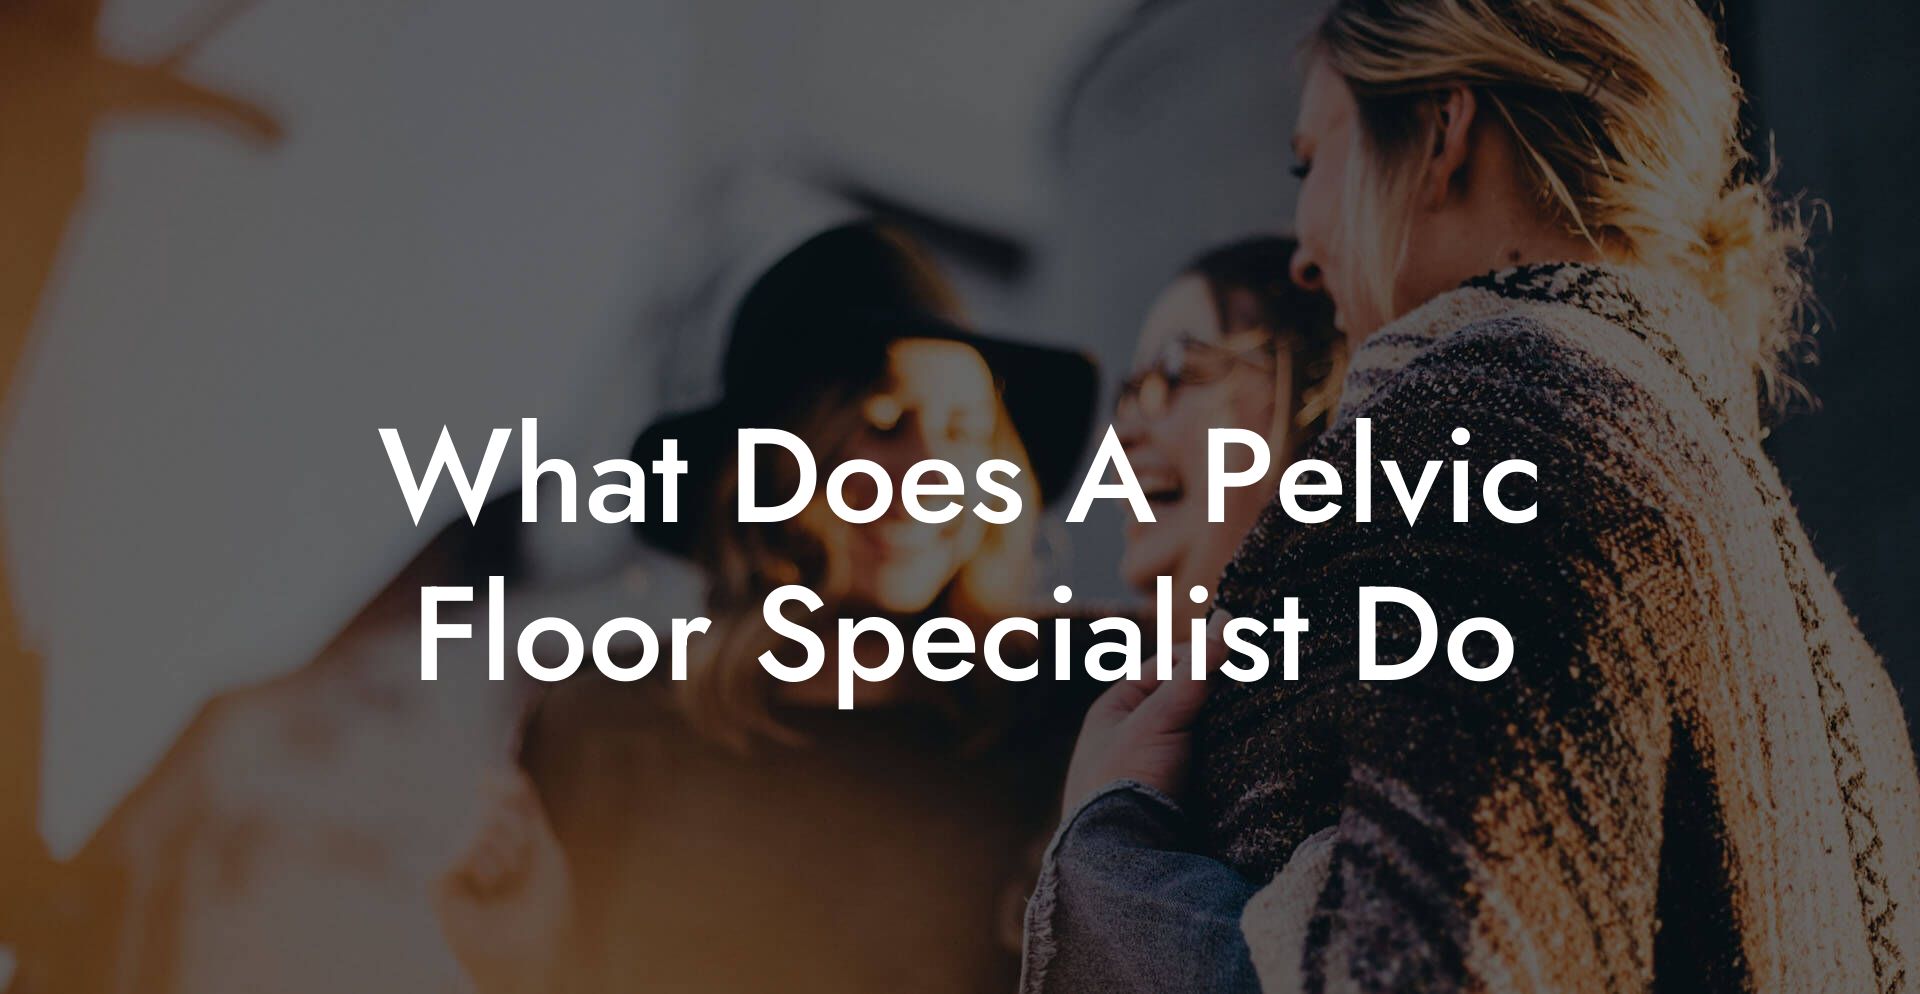 What Does A Pelvic Floor Specialist Do?